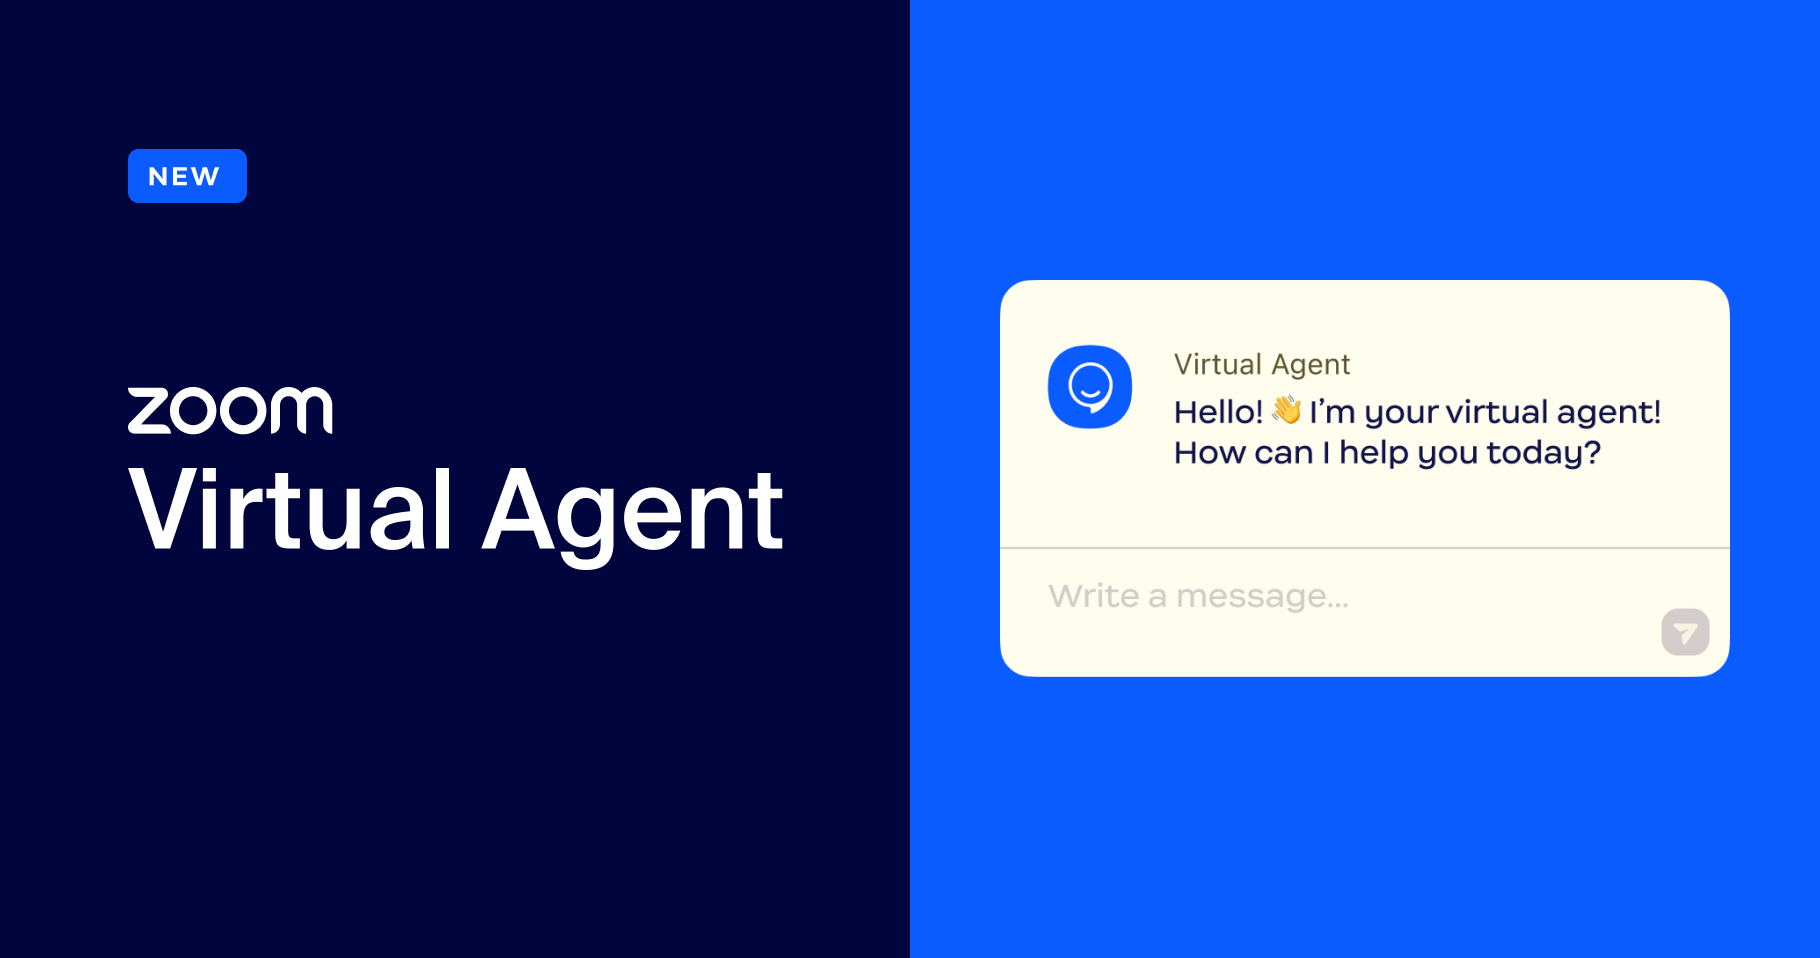 Hello! 👋 I'm your virtual agent! How can I help you today?